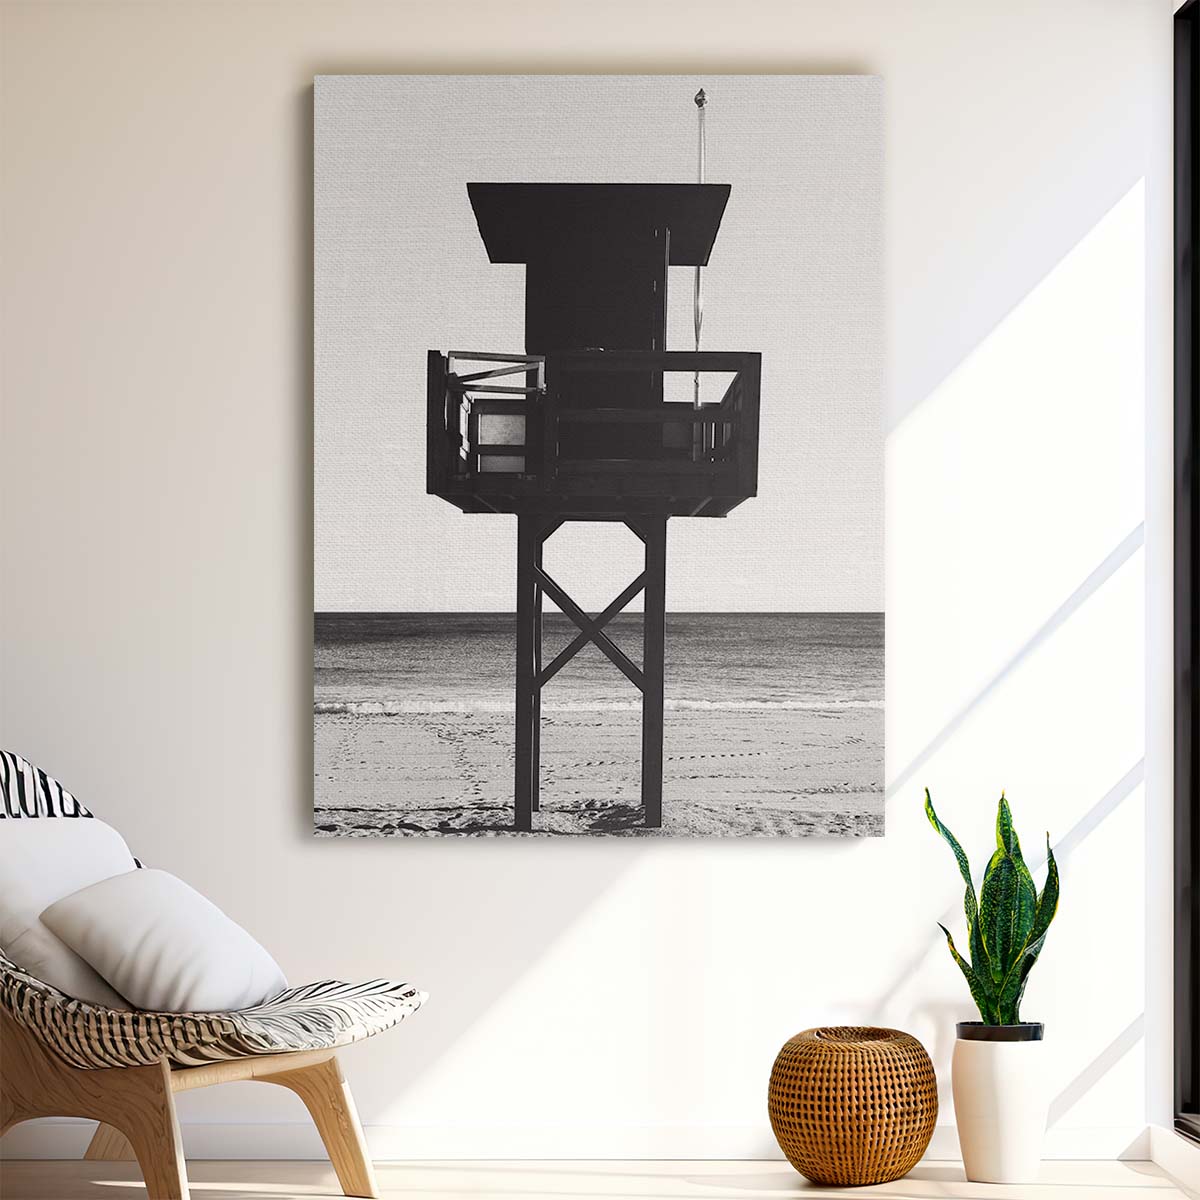 Black and White Beach Lifeguard Tower Seascape Photography Art by Luxuriance Designs, made in USA